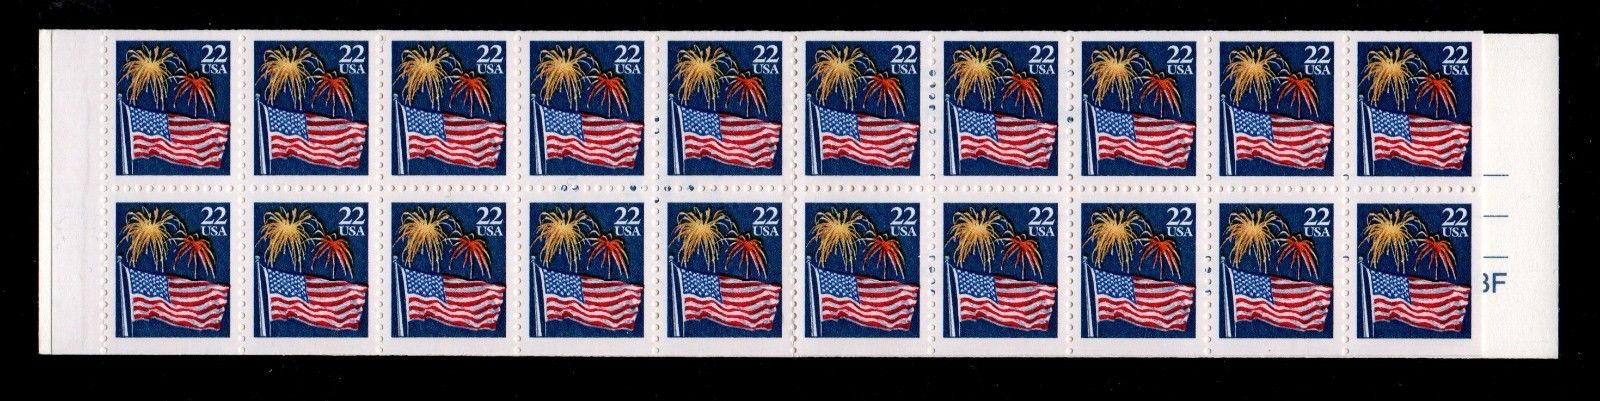 2276a 22c Flags  Fireworks Booklet Pane of 20 Mint NH #2276apane